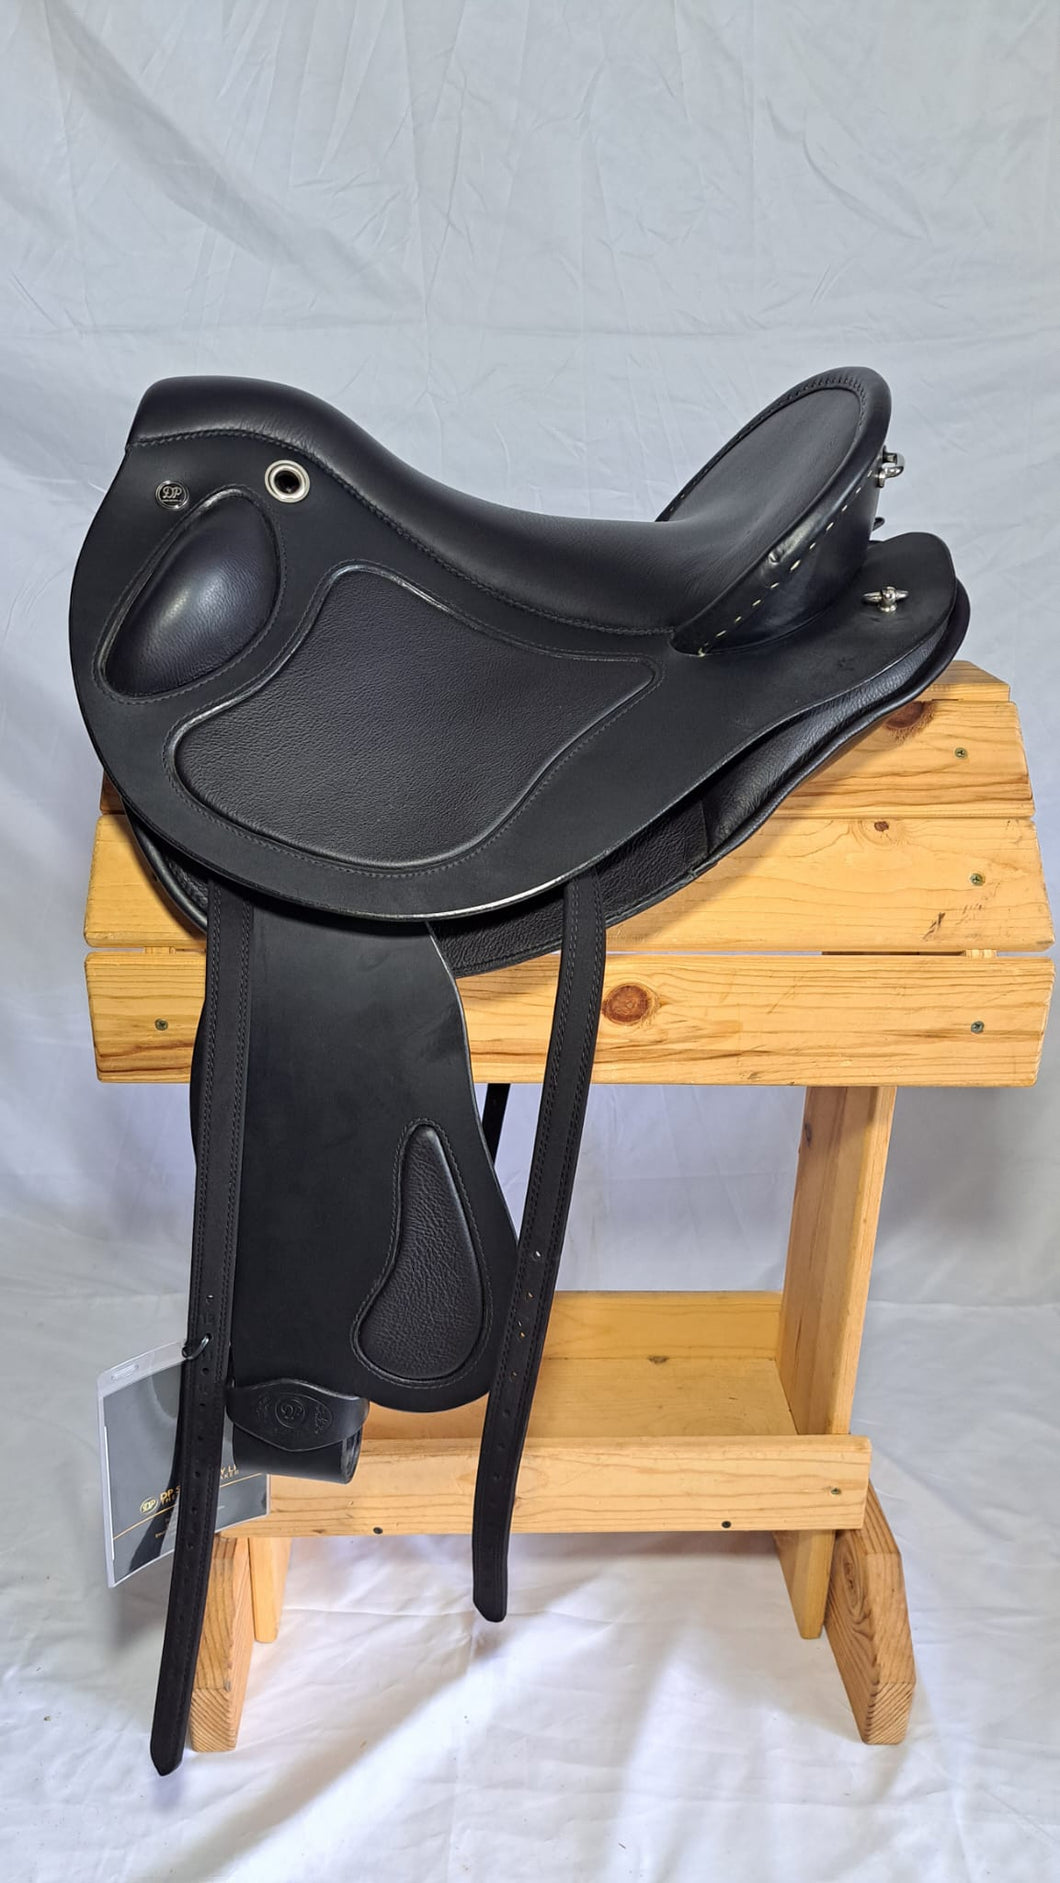 dp saddlery quantum sport 7200, side view on a wooden saddle rack, white background